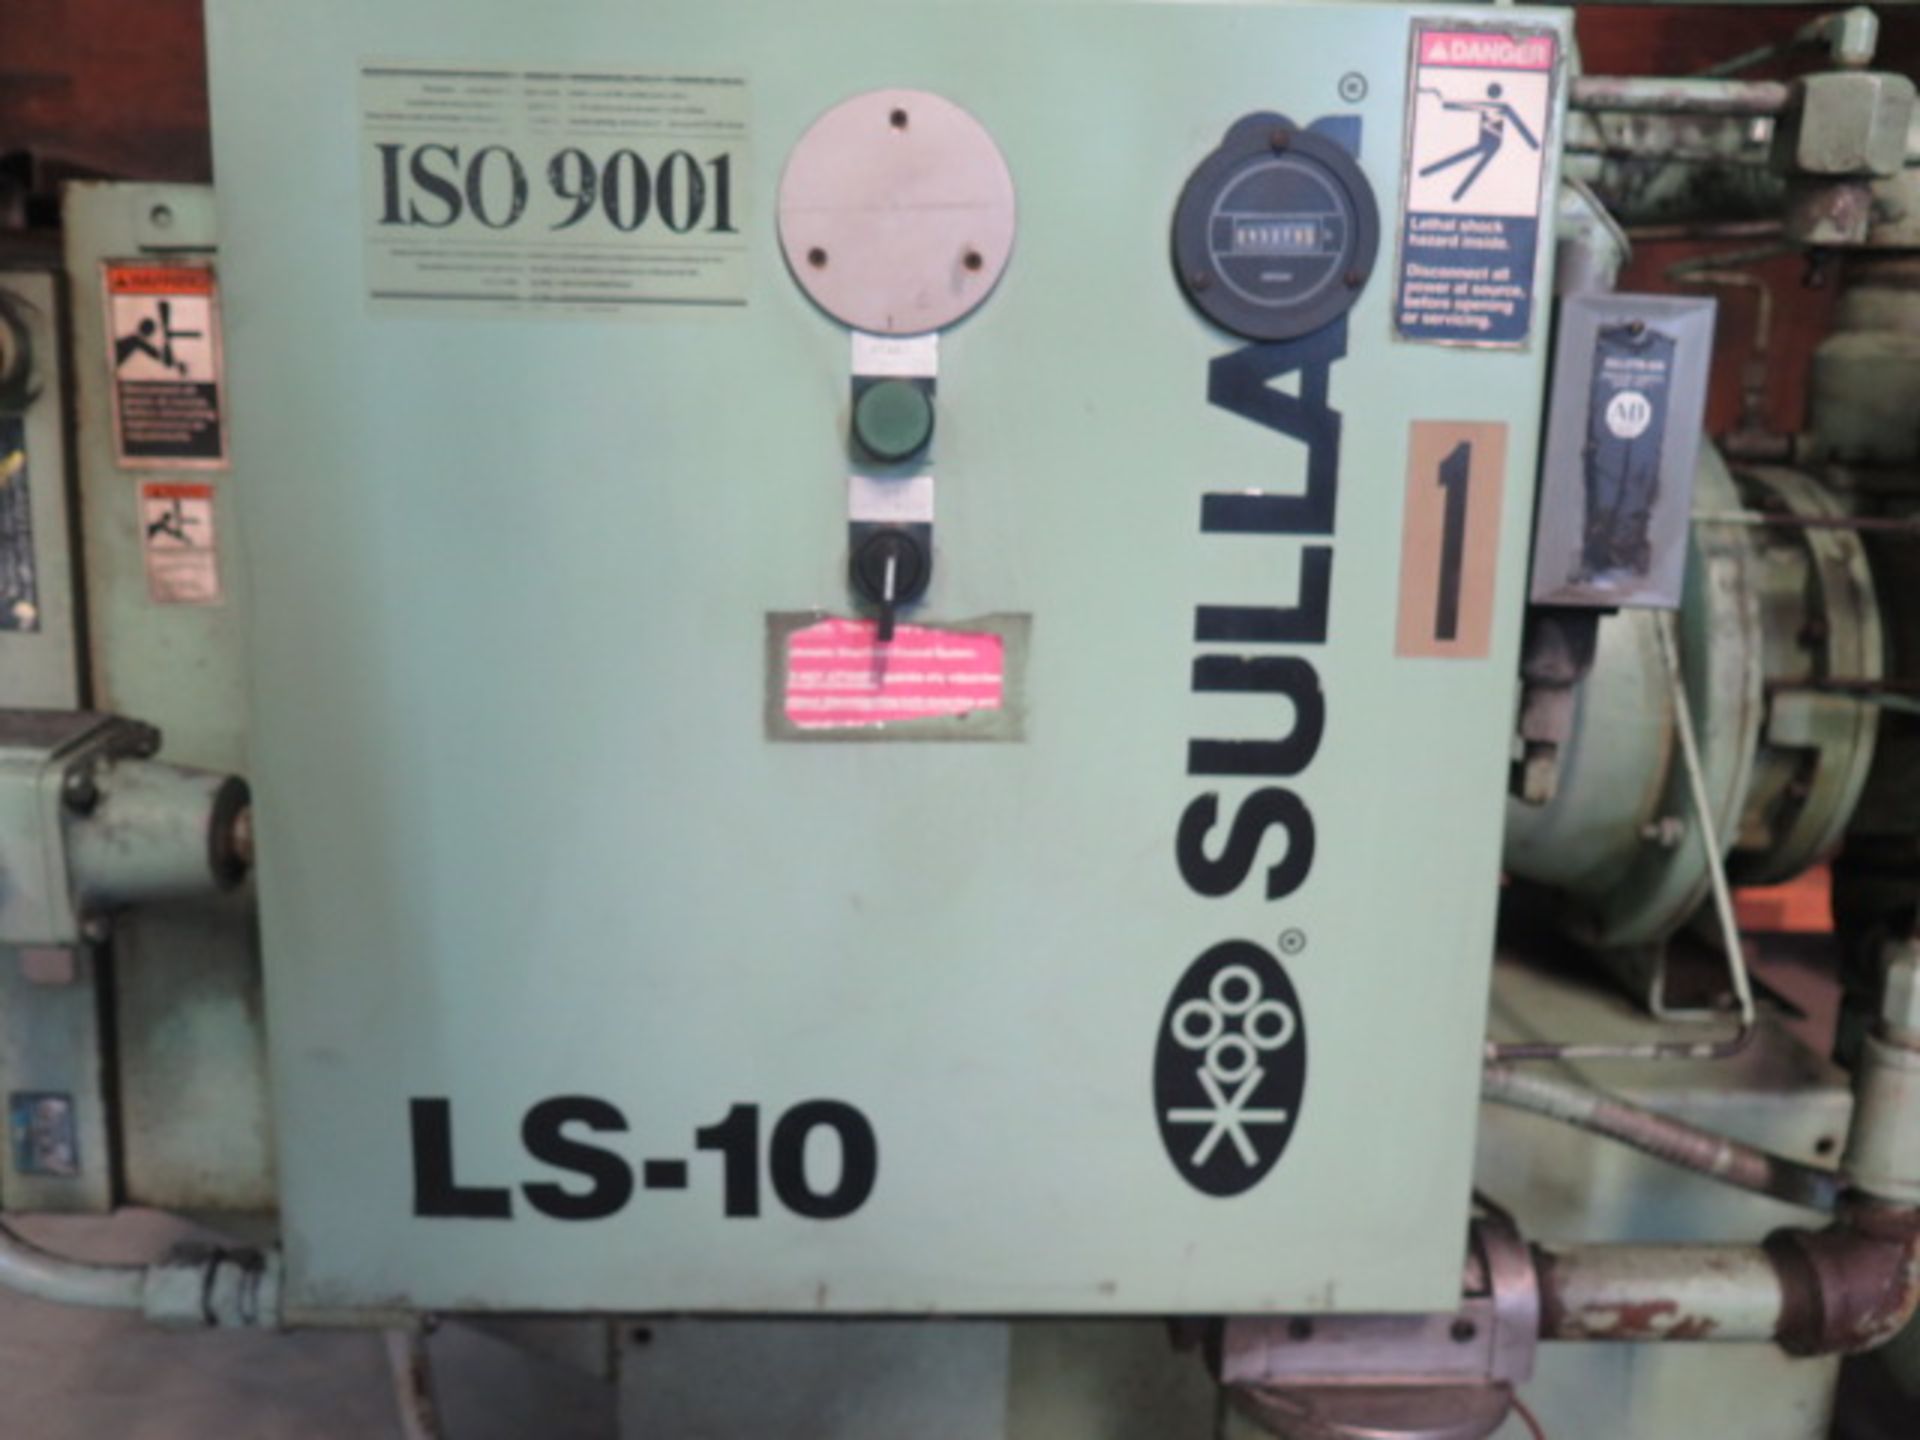 Sullair LS-10 40Hp Rotary Vane Air Compressor (NEEDS MAIN SEAL) w/ 4327 Hours - Image 5 of 7